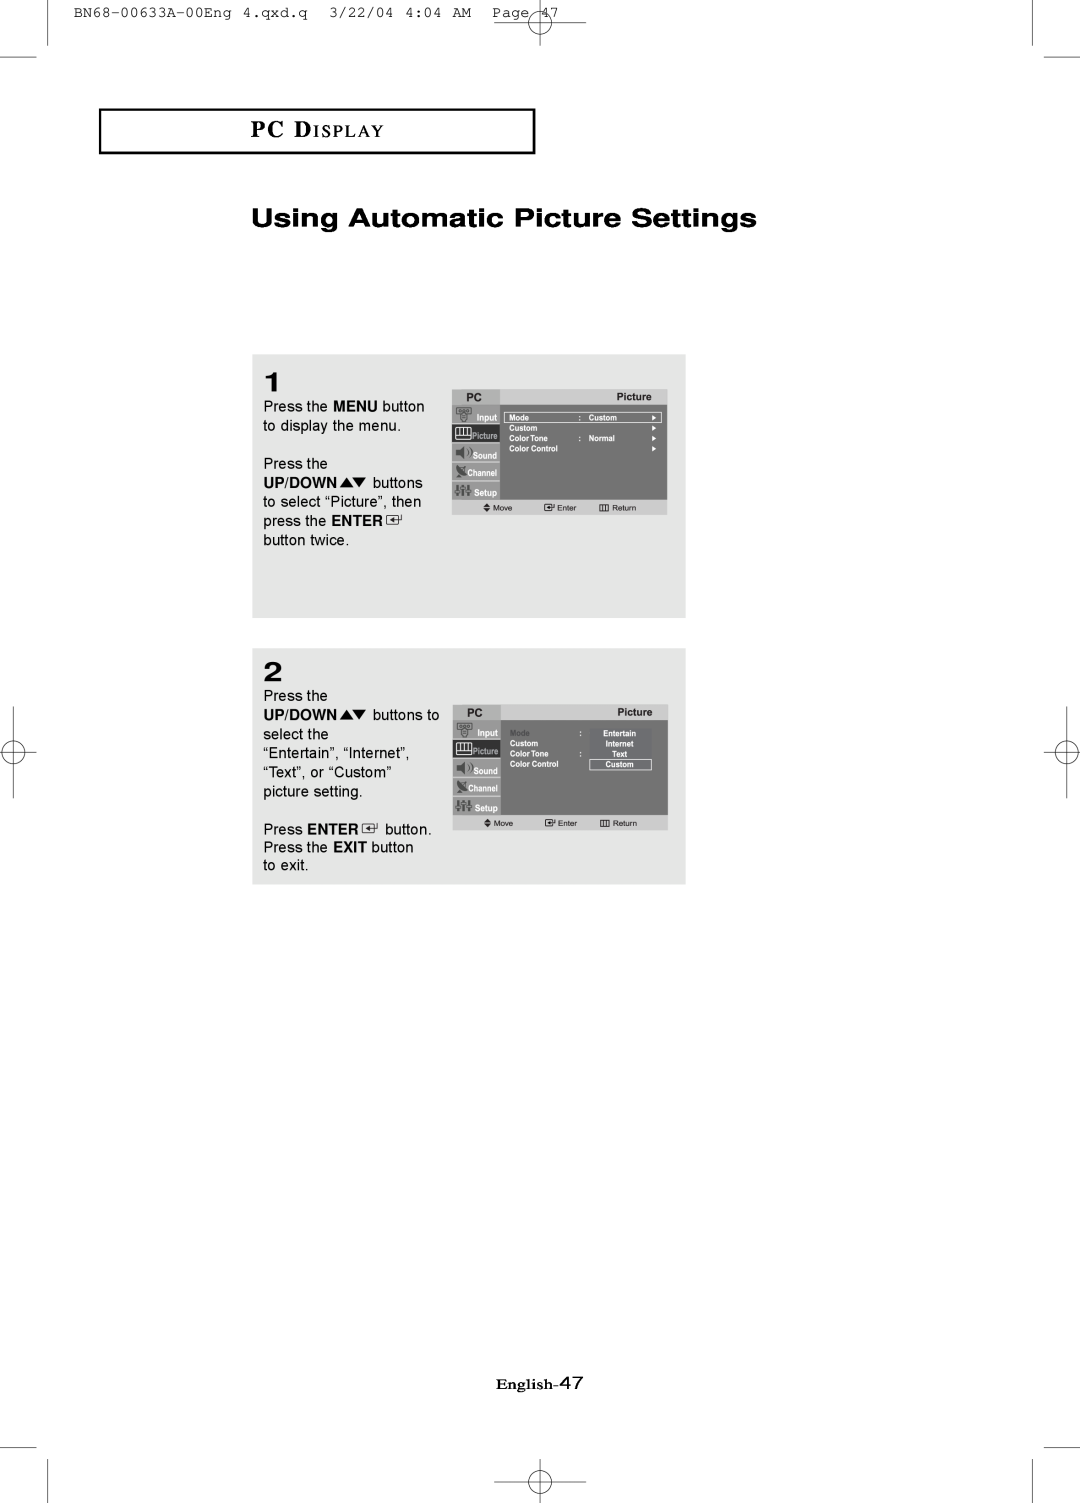 Samsung LT-P 2045 manual Using Automatic Picture Settings, P C D I S P L Ay, BN68-00633A-00Eng 4.qxd.q 3/22/04 404 AM Page 